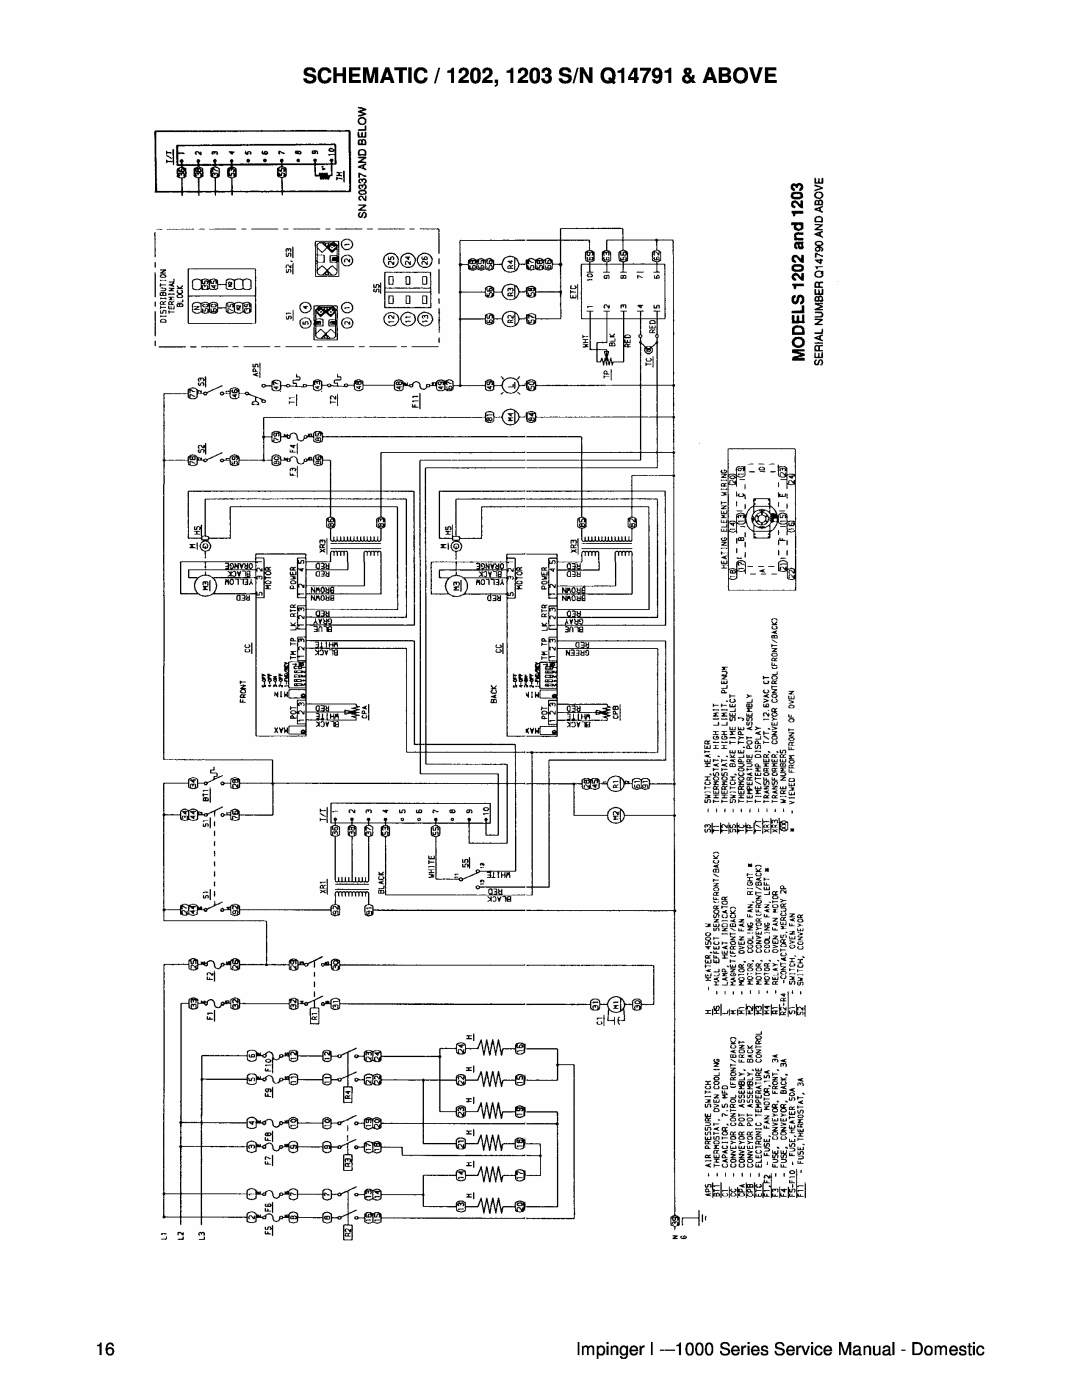 Lincoln 1200, 1400 SCHEMATIC / 1202, 1203 S/N Q14791 & ABOVE, Impinger I -–1000Series Service Manual - Domestic 